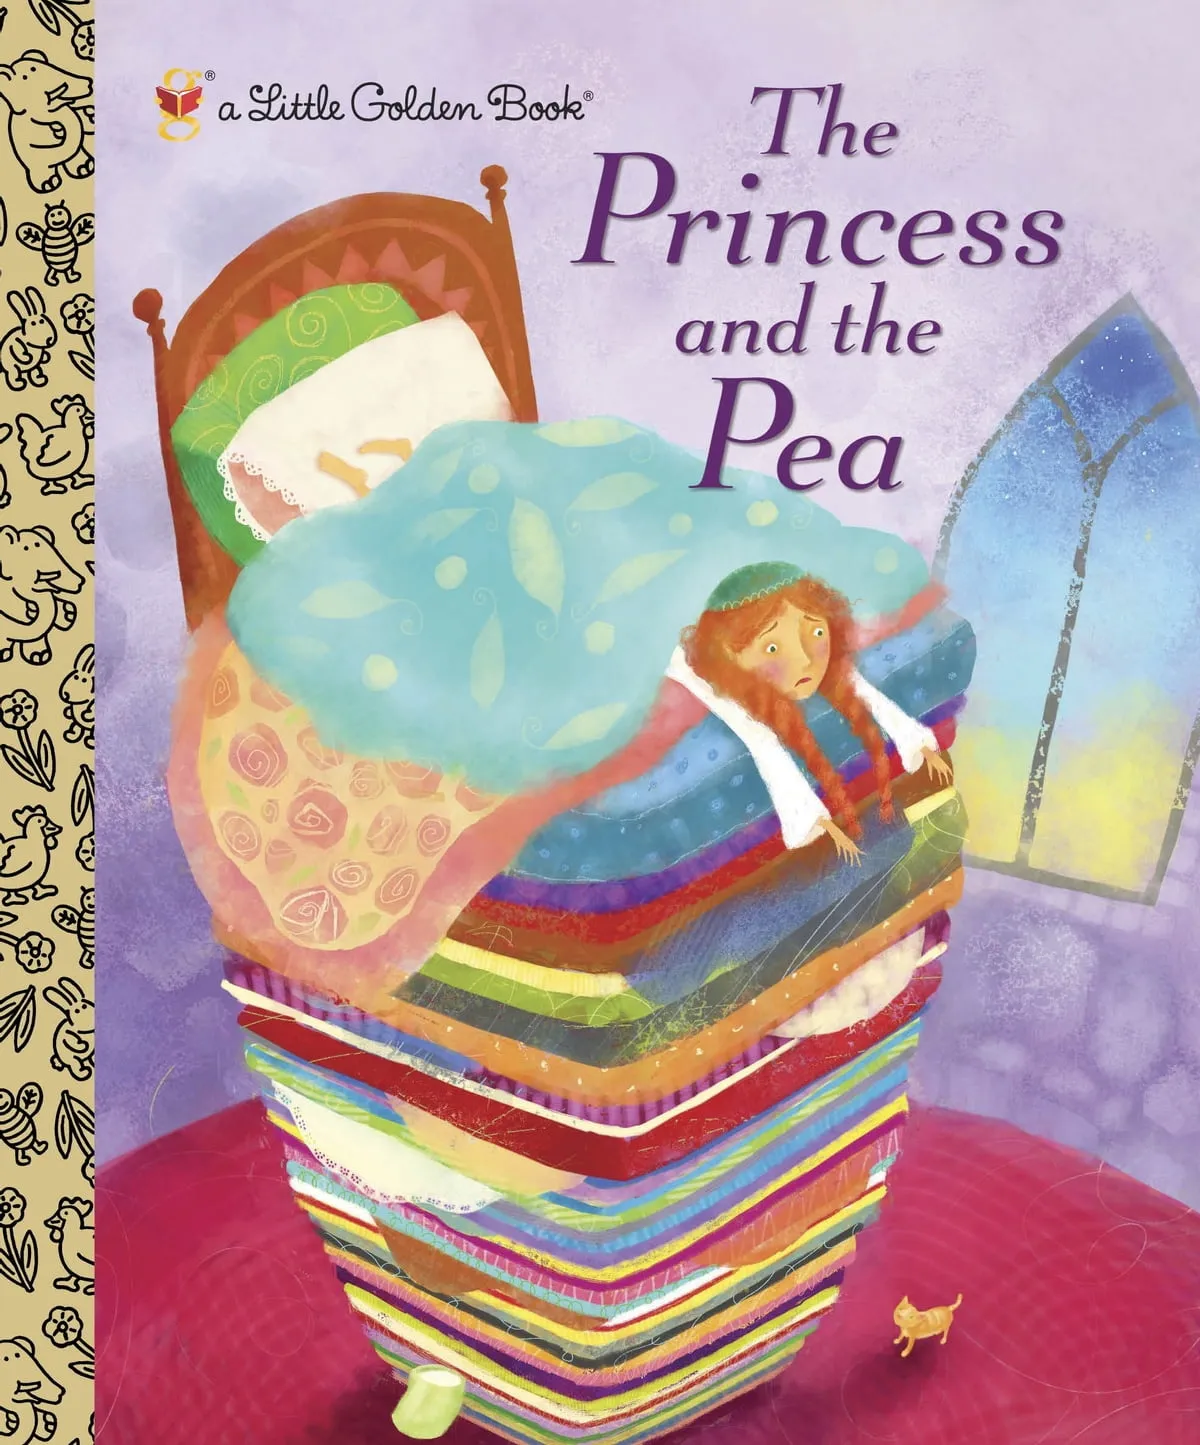 'Penelope‎': Disney will make 'The Princess and the Pea‎' live-action movie | FMV6